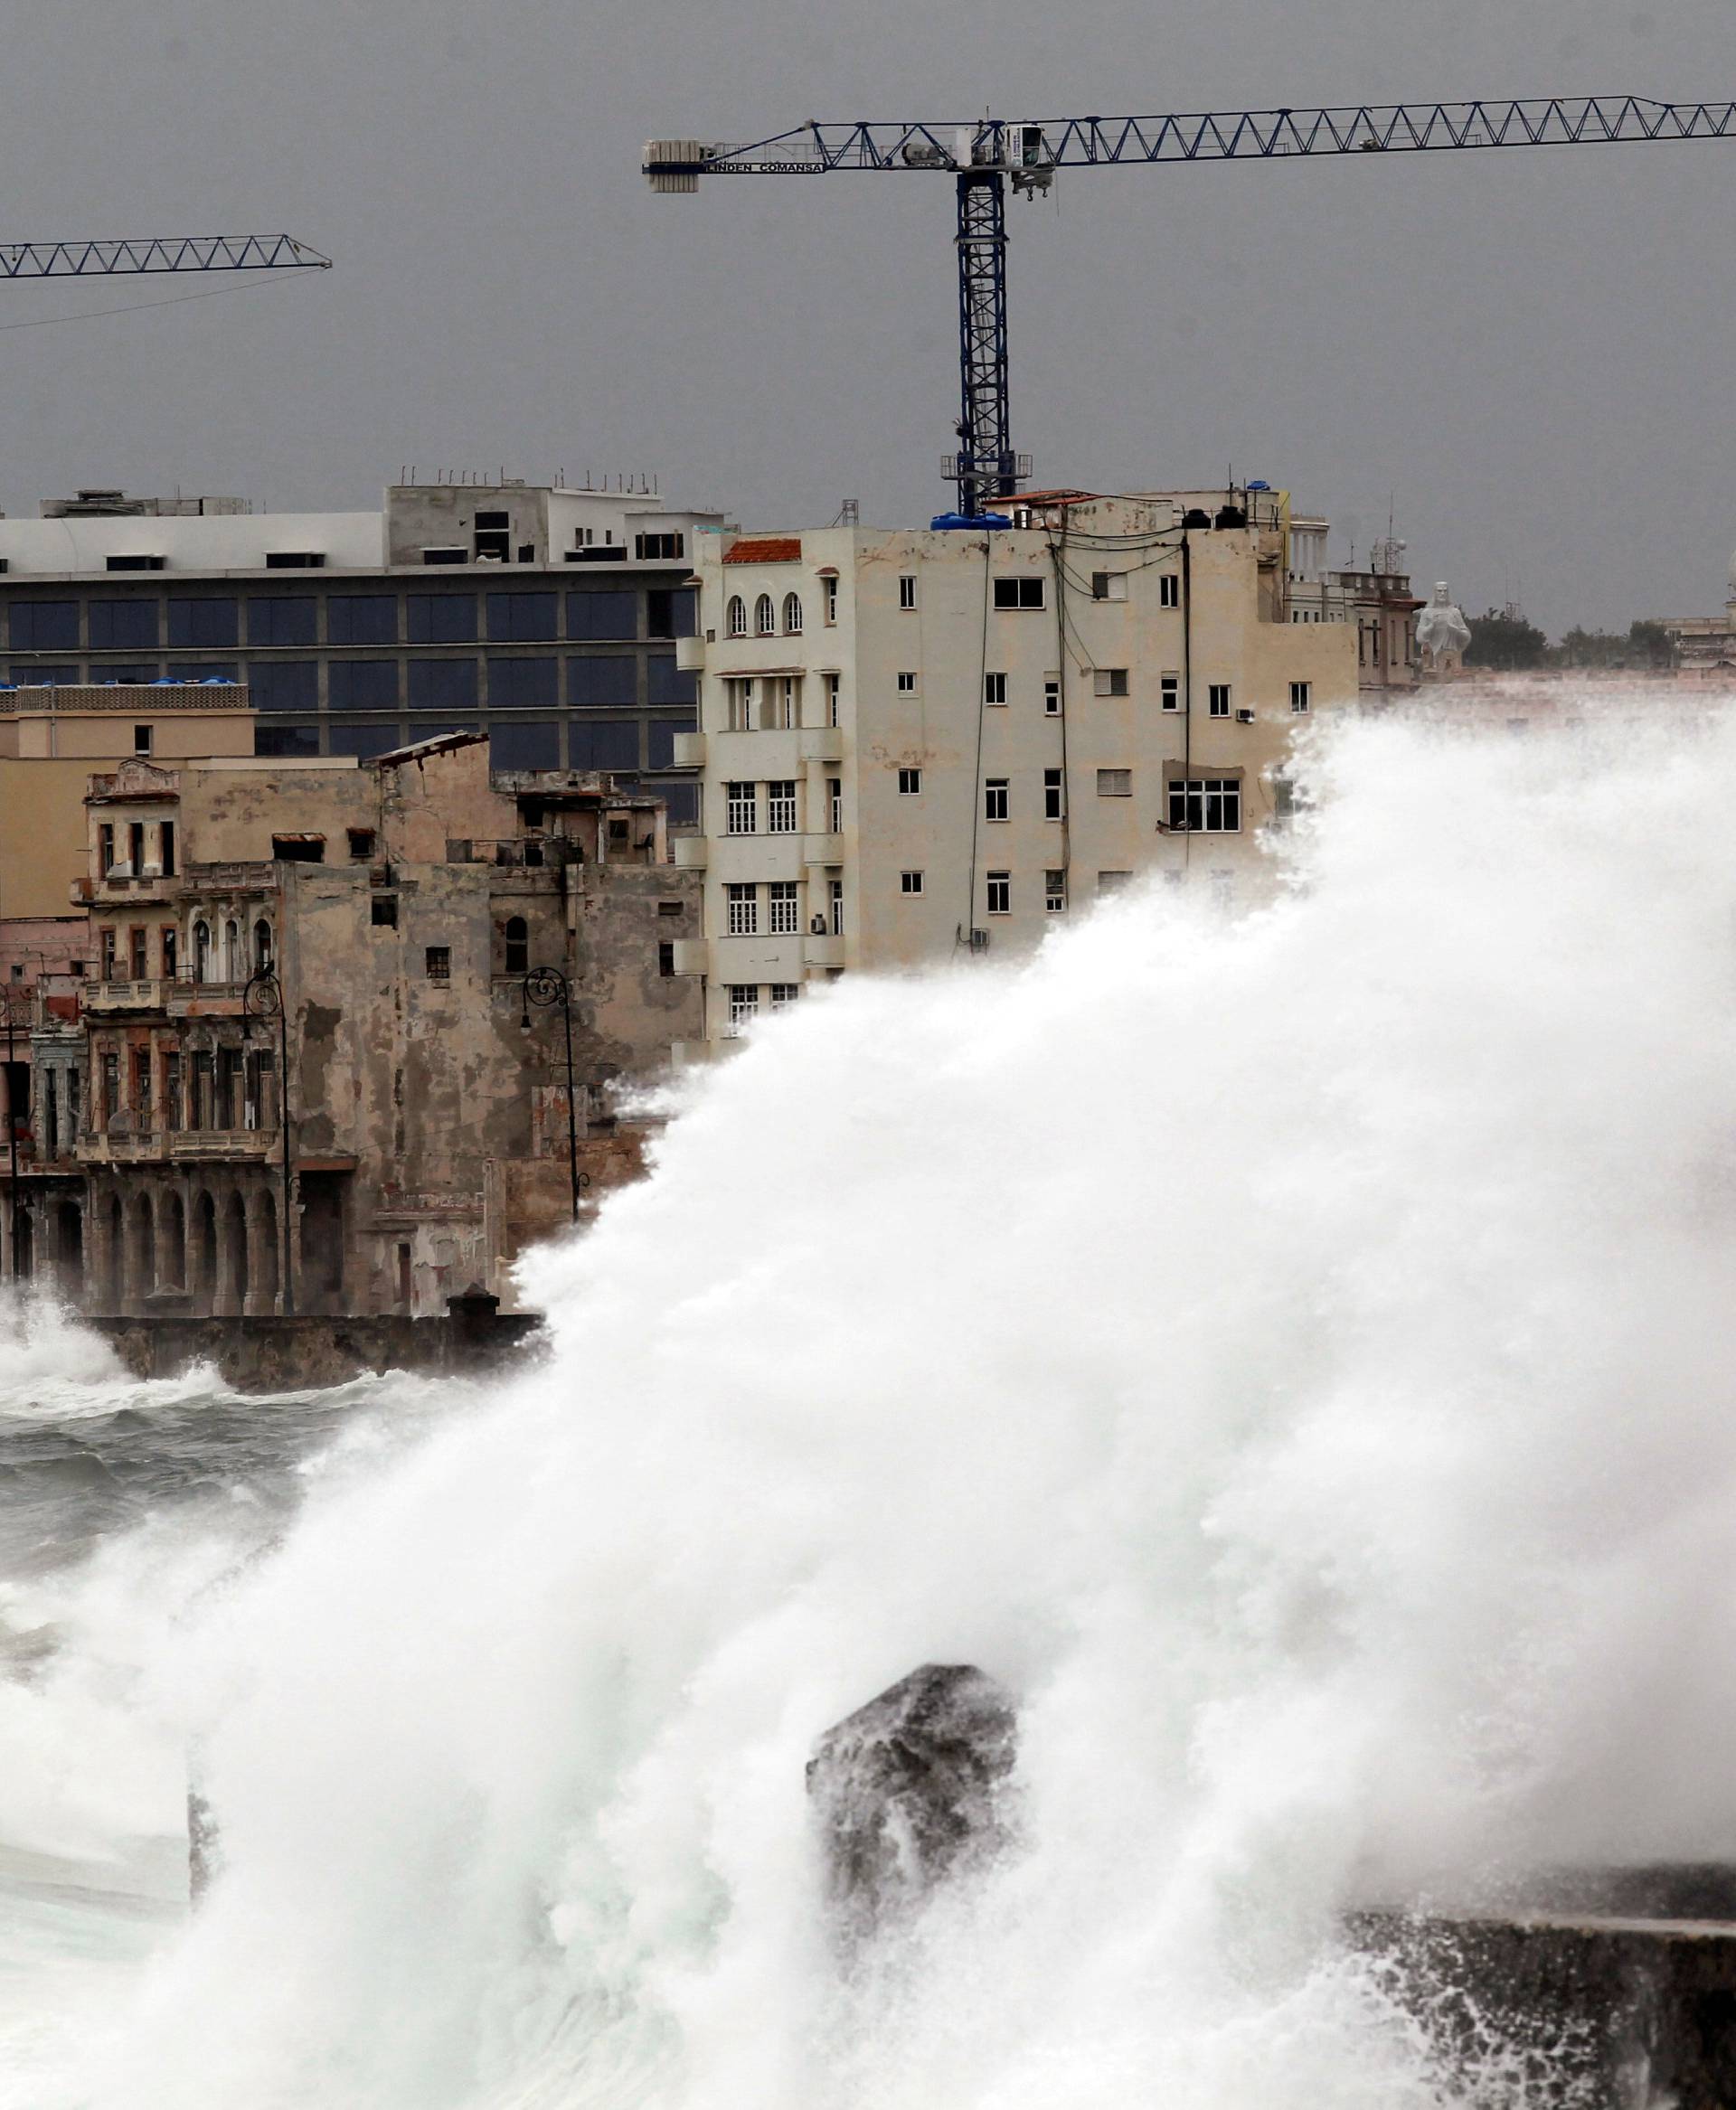 FILE PHOTO: Waves crash against the seafront boulevard El Malecon ahead of the passing of Hurricane Irma, in Havana